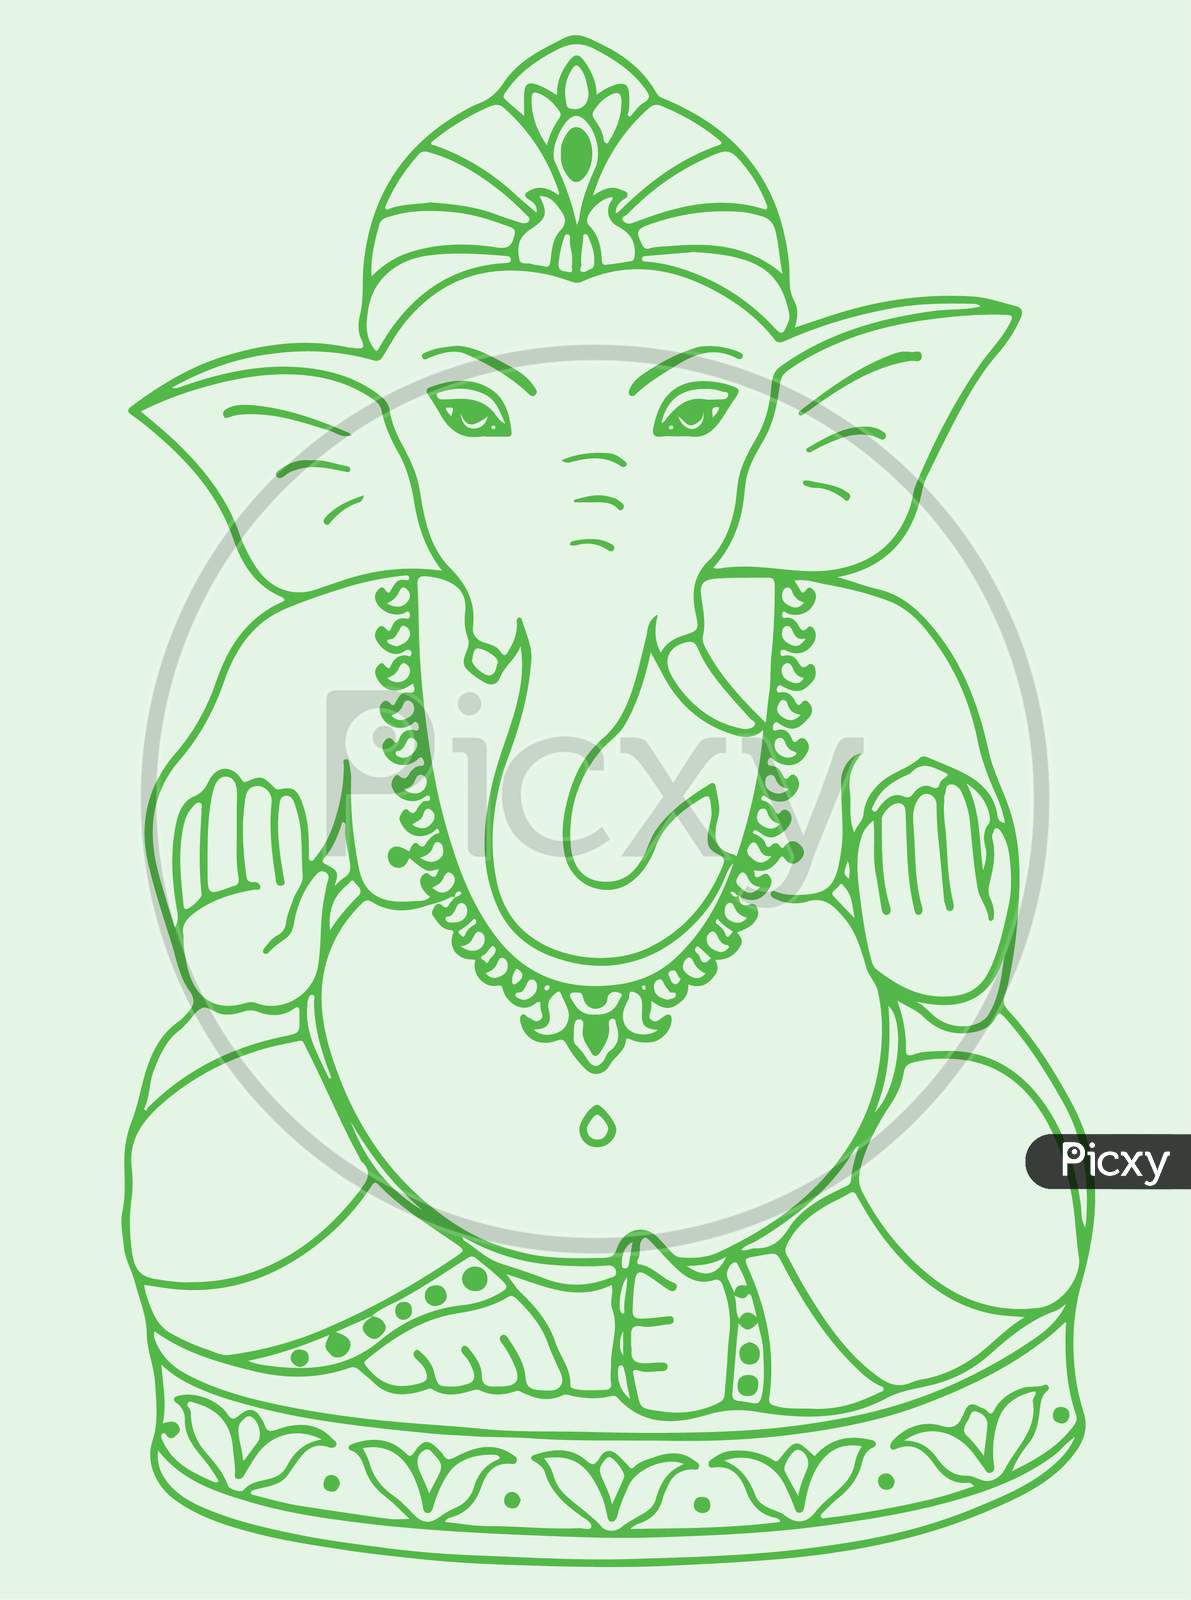 Ganesh Chaturthi Special Drawing... - Tiny Prints Art Academy | Facebook